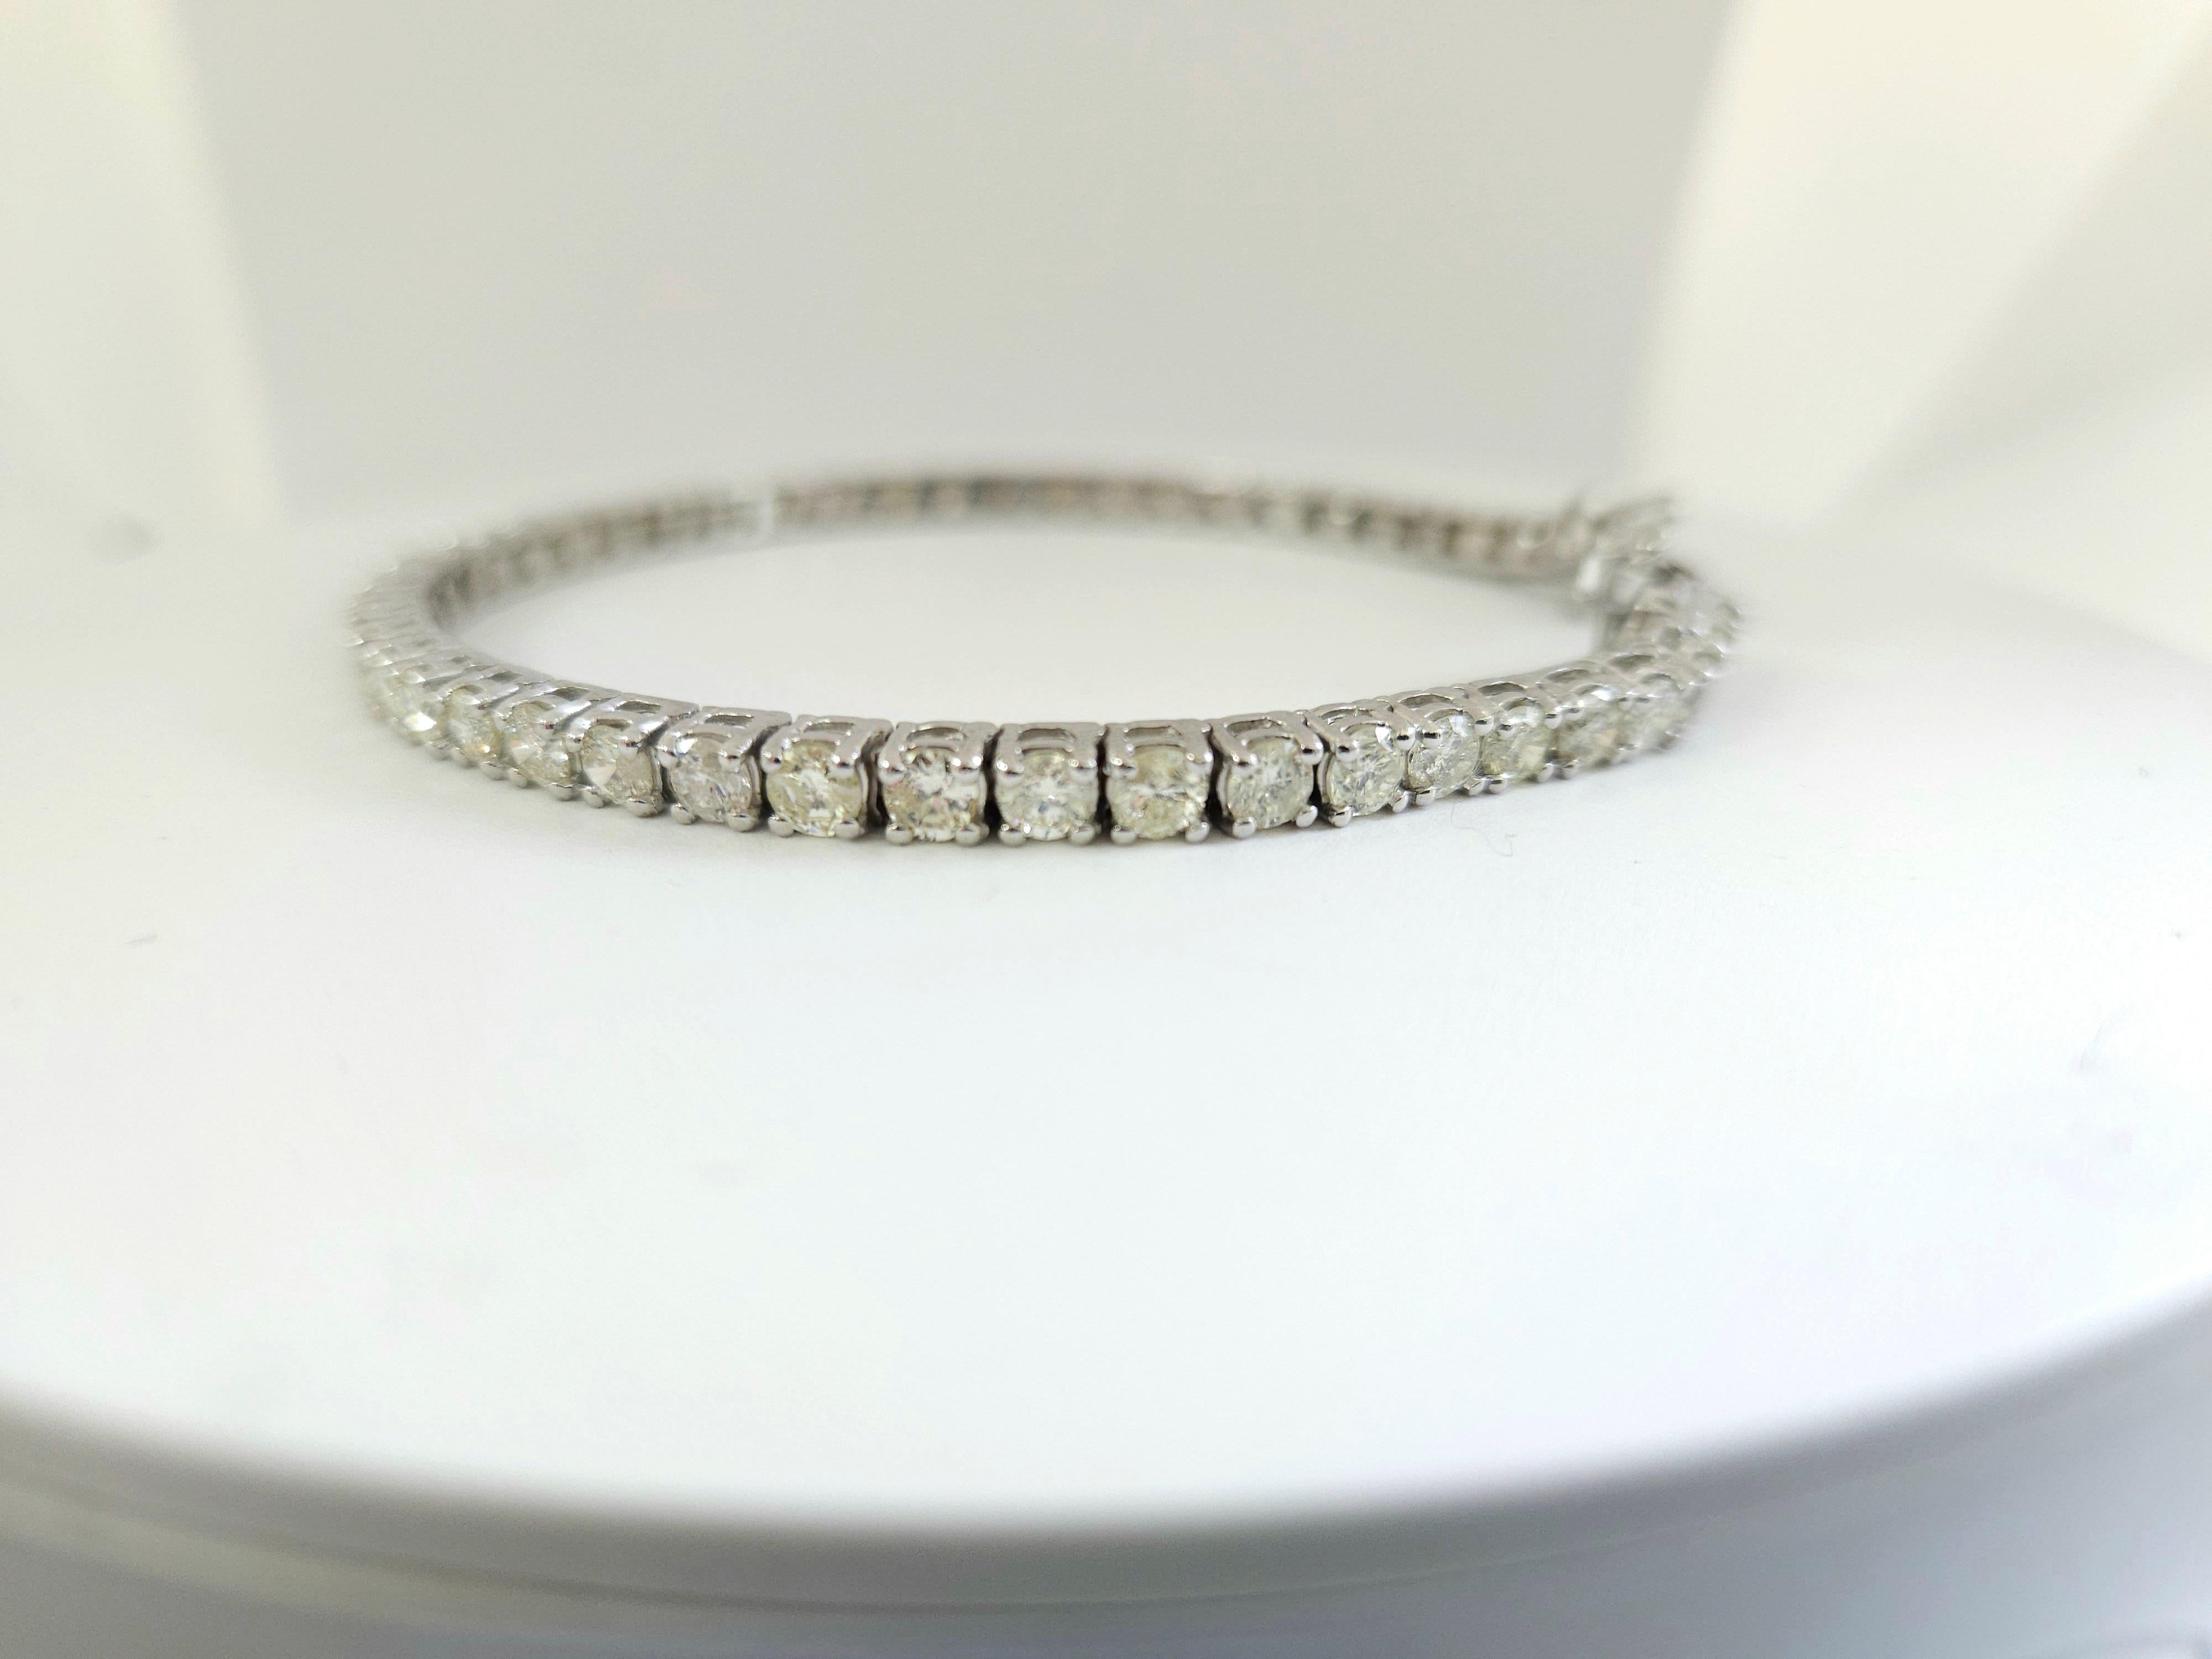 7.52 Carat Round Brilliant Cut Diamond Tennis Bracelet 14 Karat White Gold In New Condition For Sale In Great Neck, NY